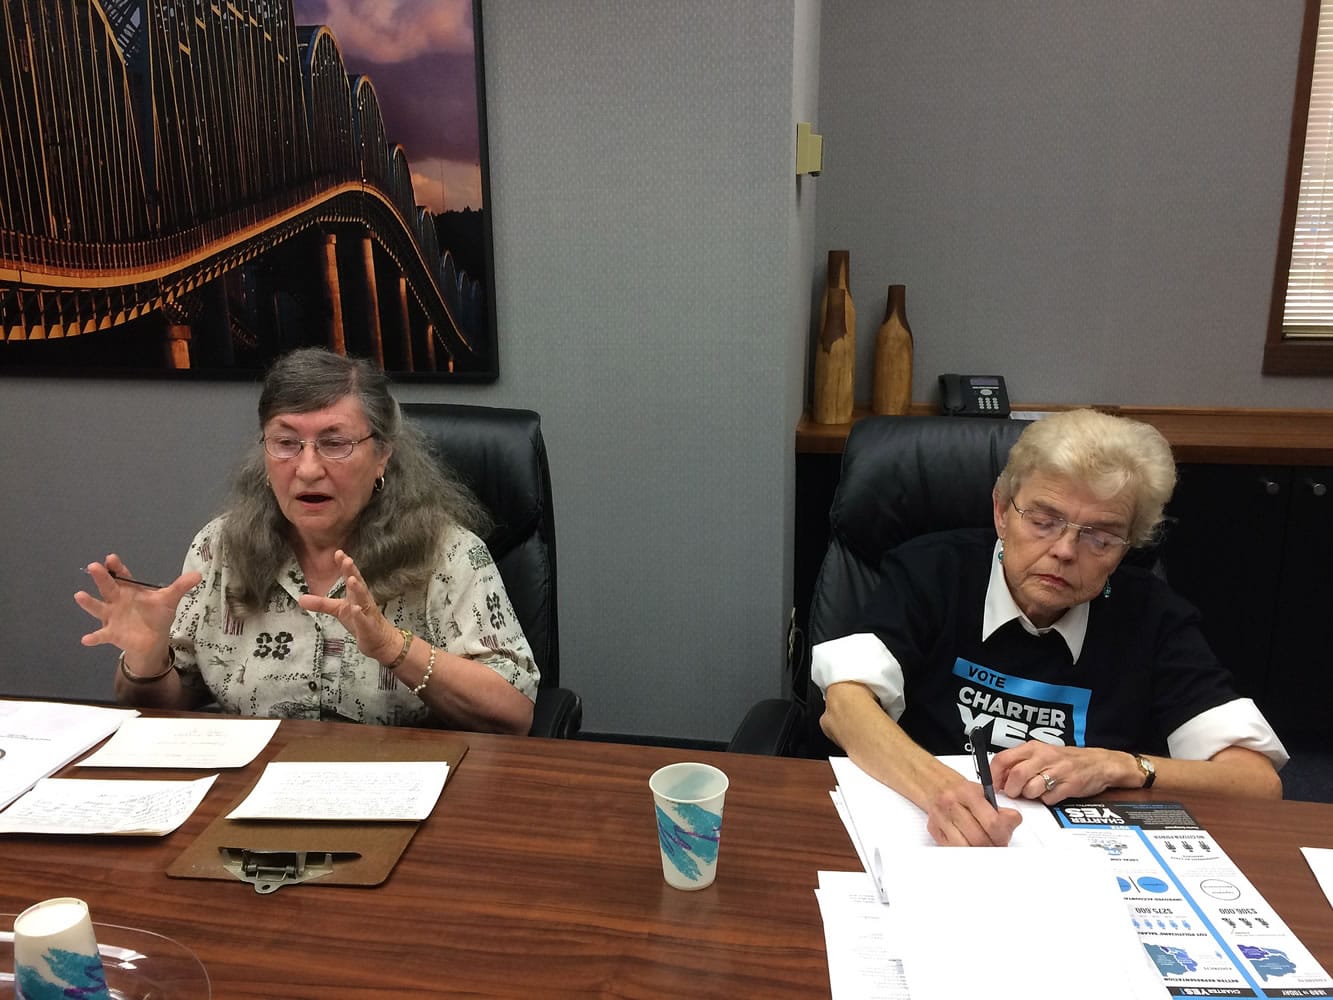 Lou Brancaccio/The Columbian
Judith Anderson, left, and Nan Henriksen, right, discuss the proposed home rule charter with The Columbian's editorial board.